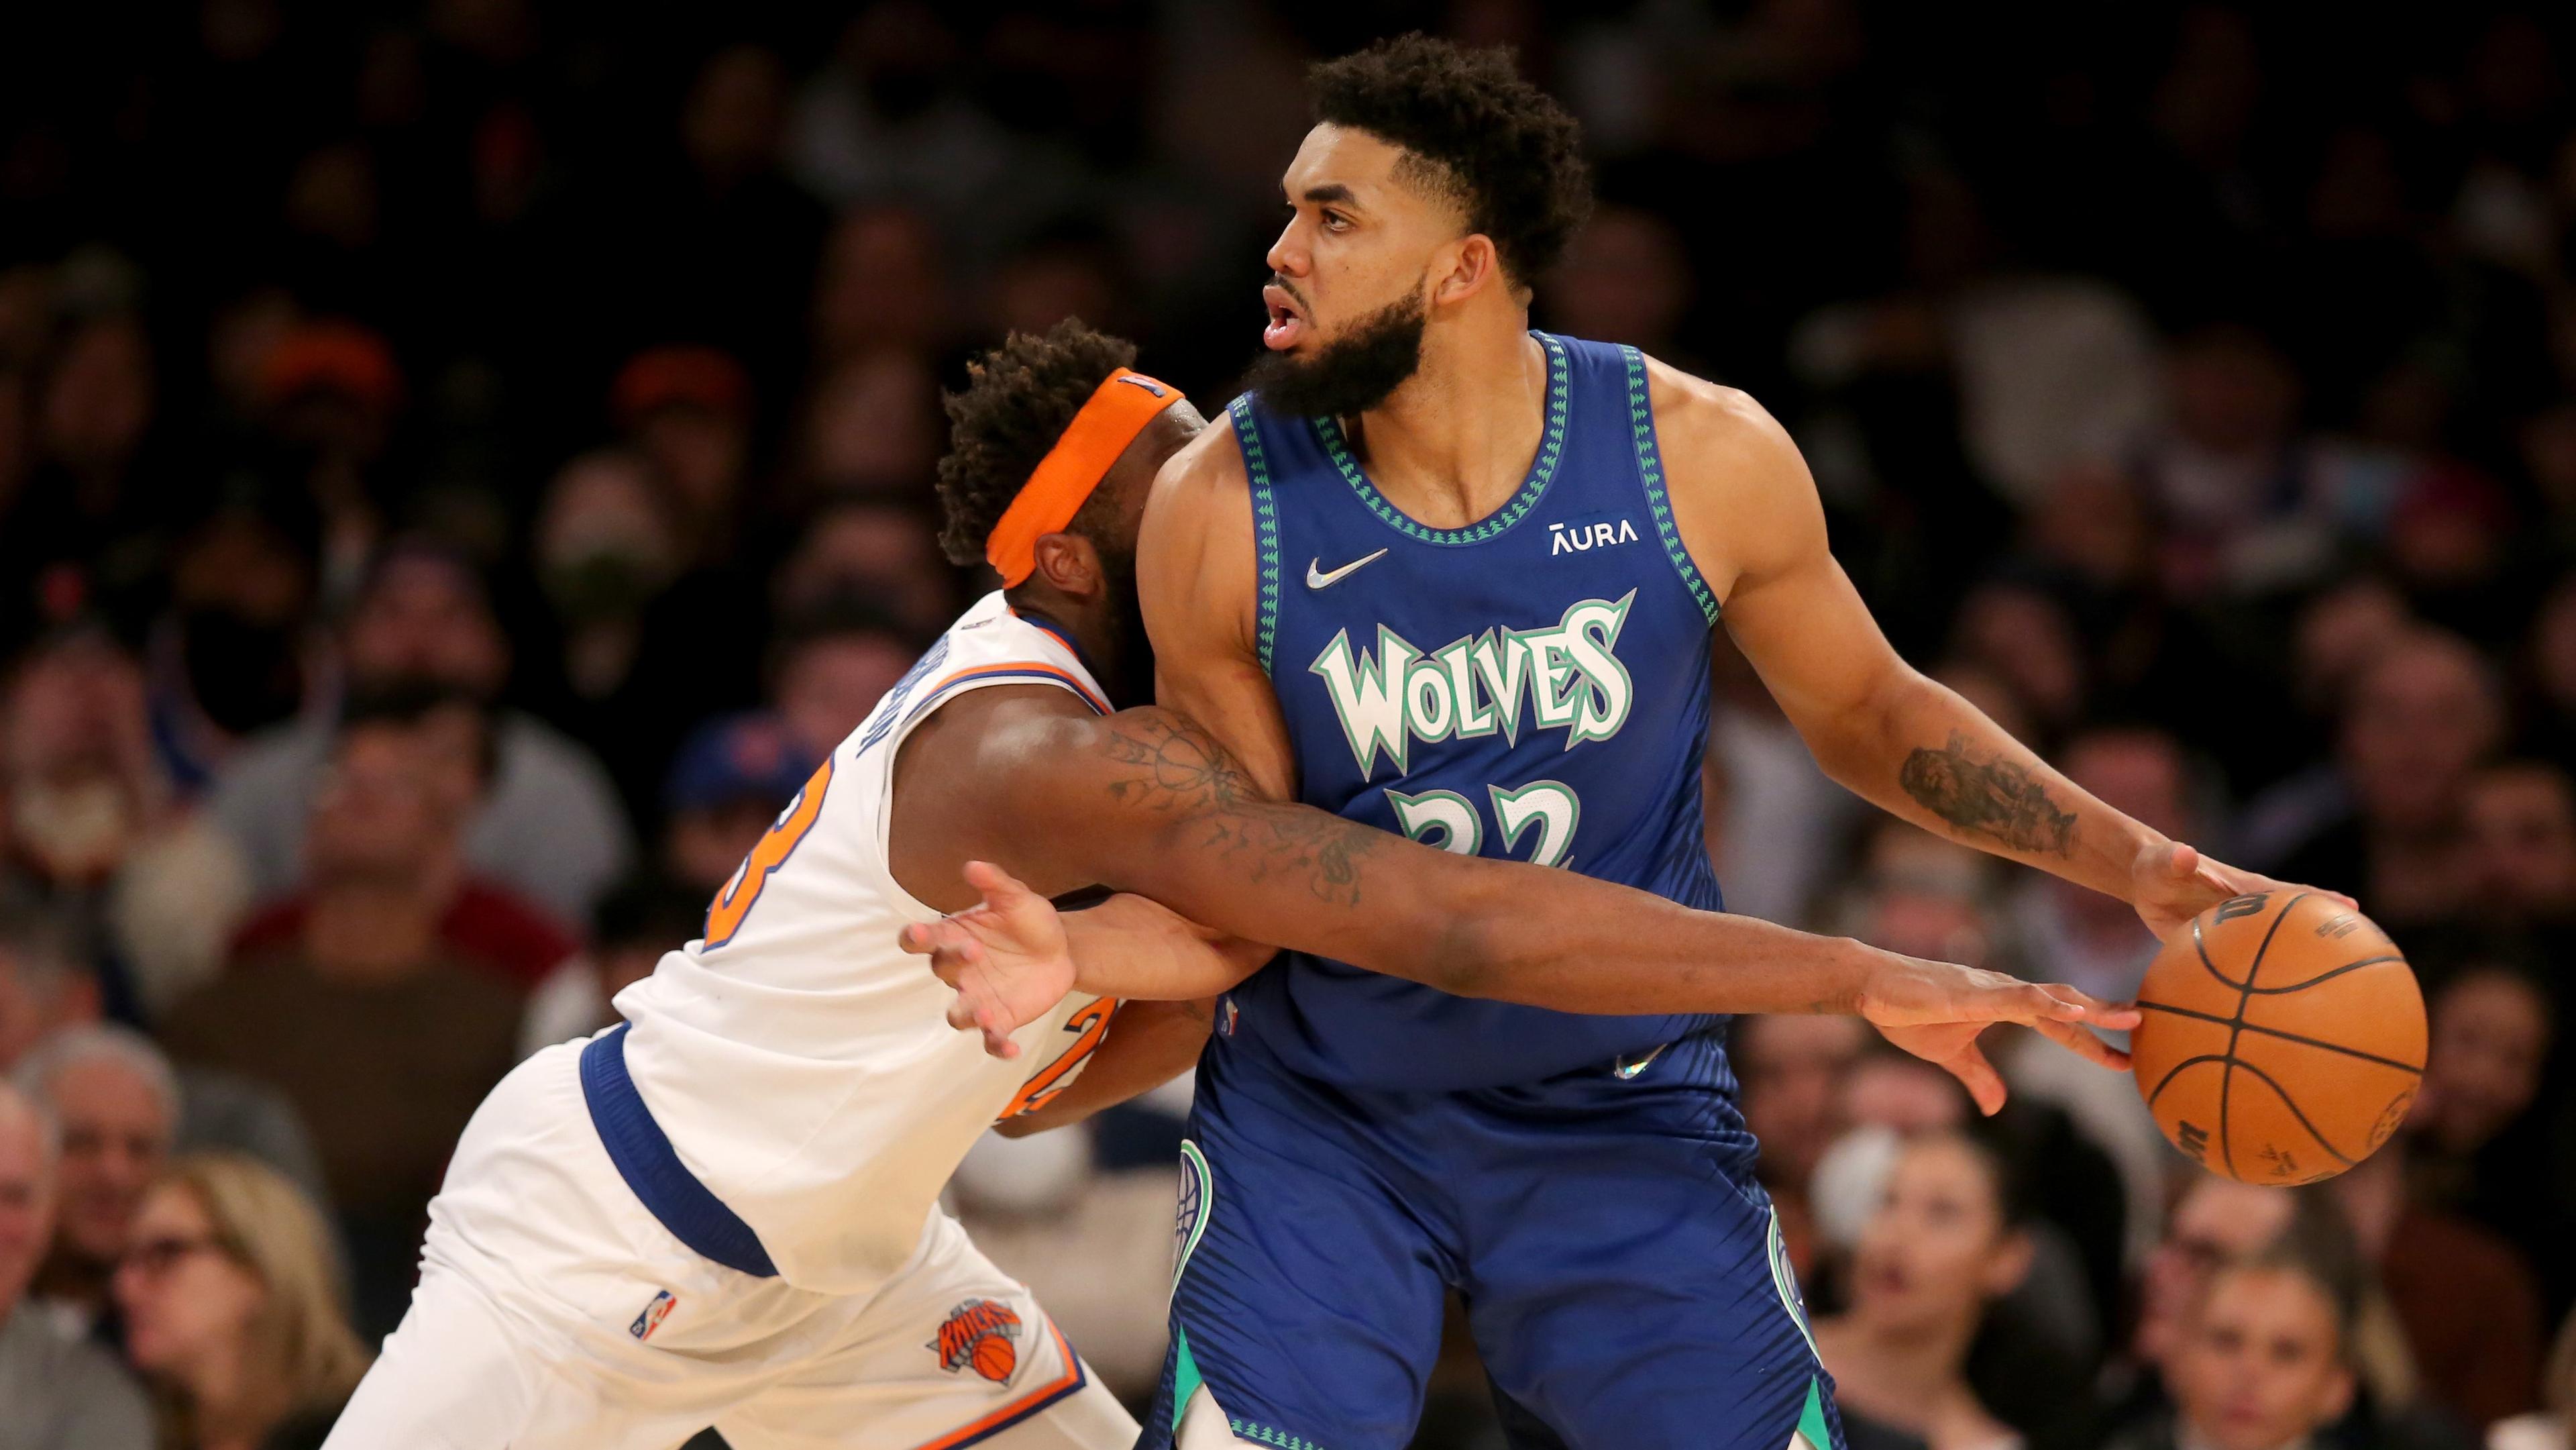 Jan 18, 2022; New York, New York, USA; New York Knicks center Mitchell Robinson (23) knocks the ball away from Minnesota Timberwolves center Karl-Anthony Towns (32) during the third quarter at Madison Square Garden. Mandatory Credit: Brad Penner-USA TODAY Sports / © Brad Penner-USA TODAY Sports